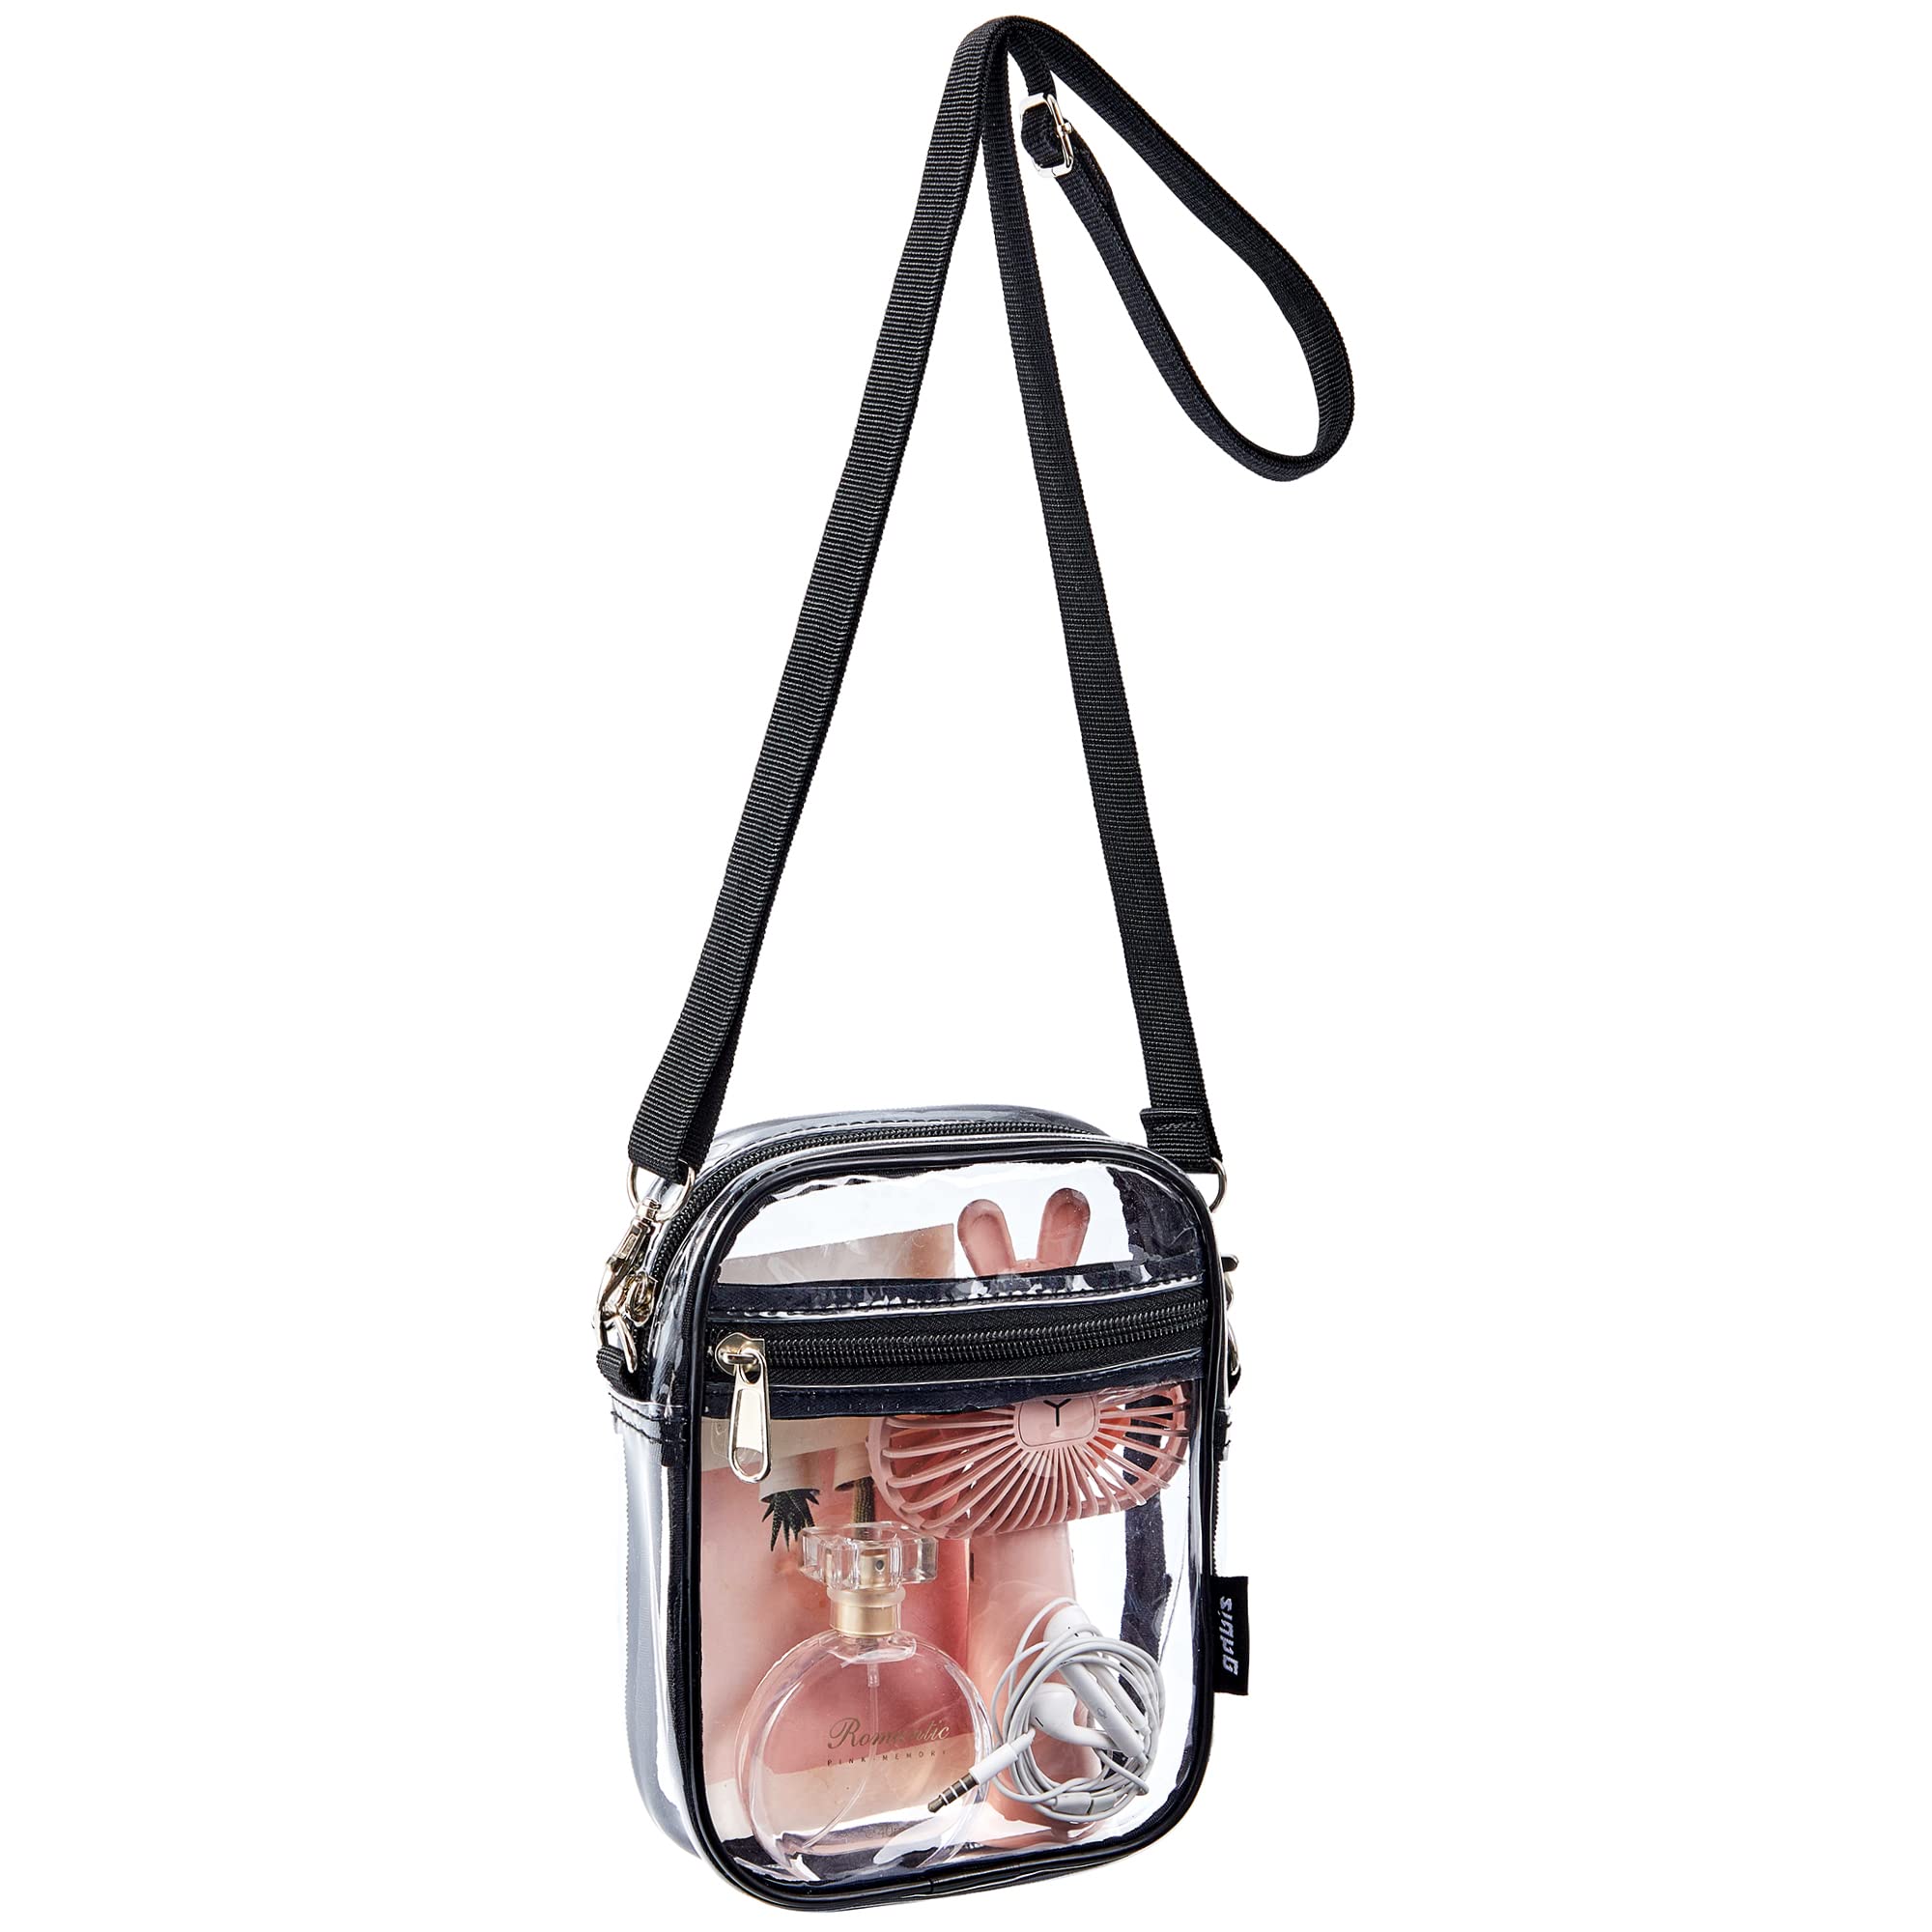 Clear Crossbody Bag, Stadium Approved Clear Purse Bag for Concerts